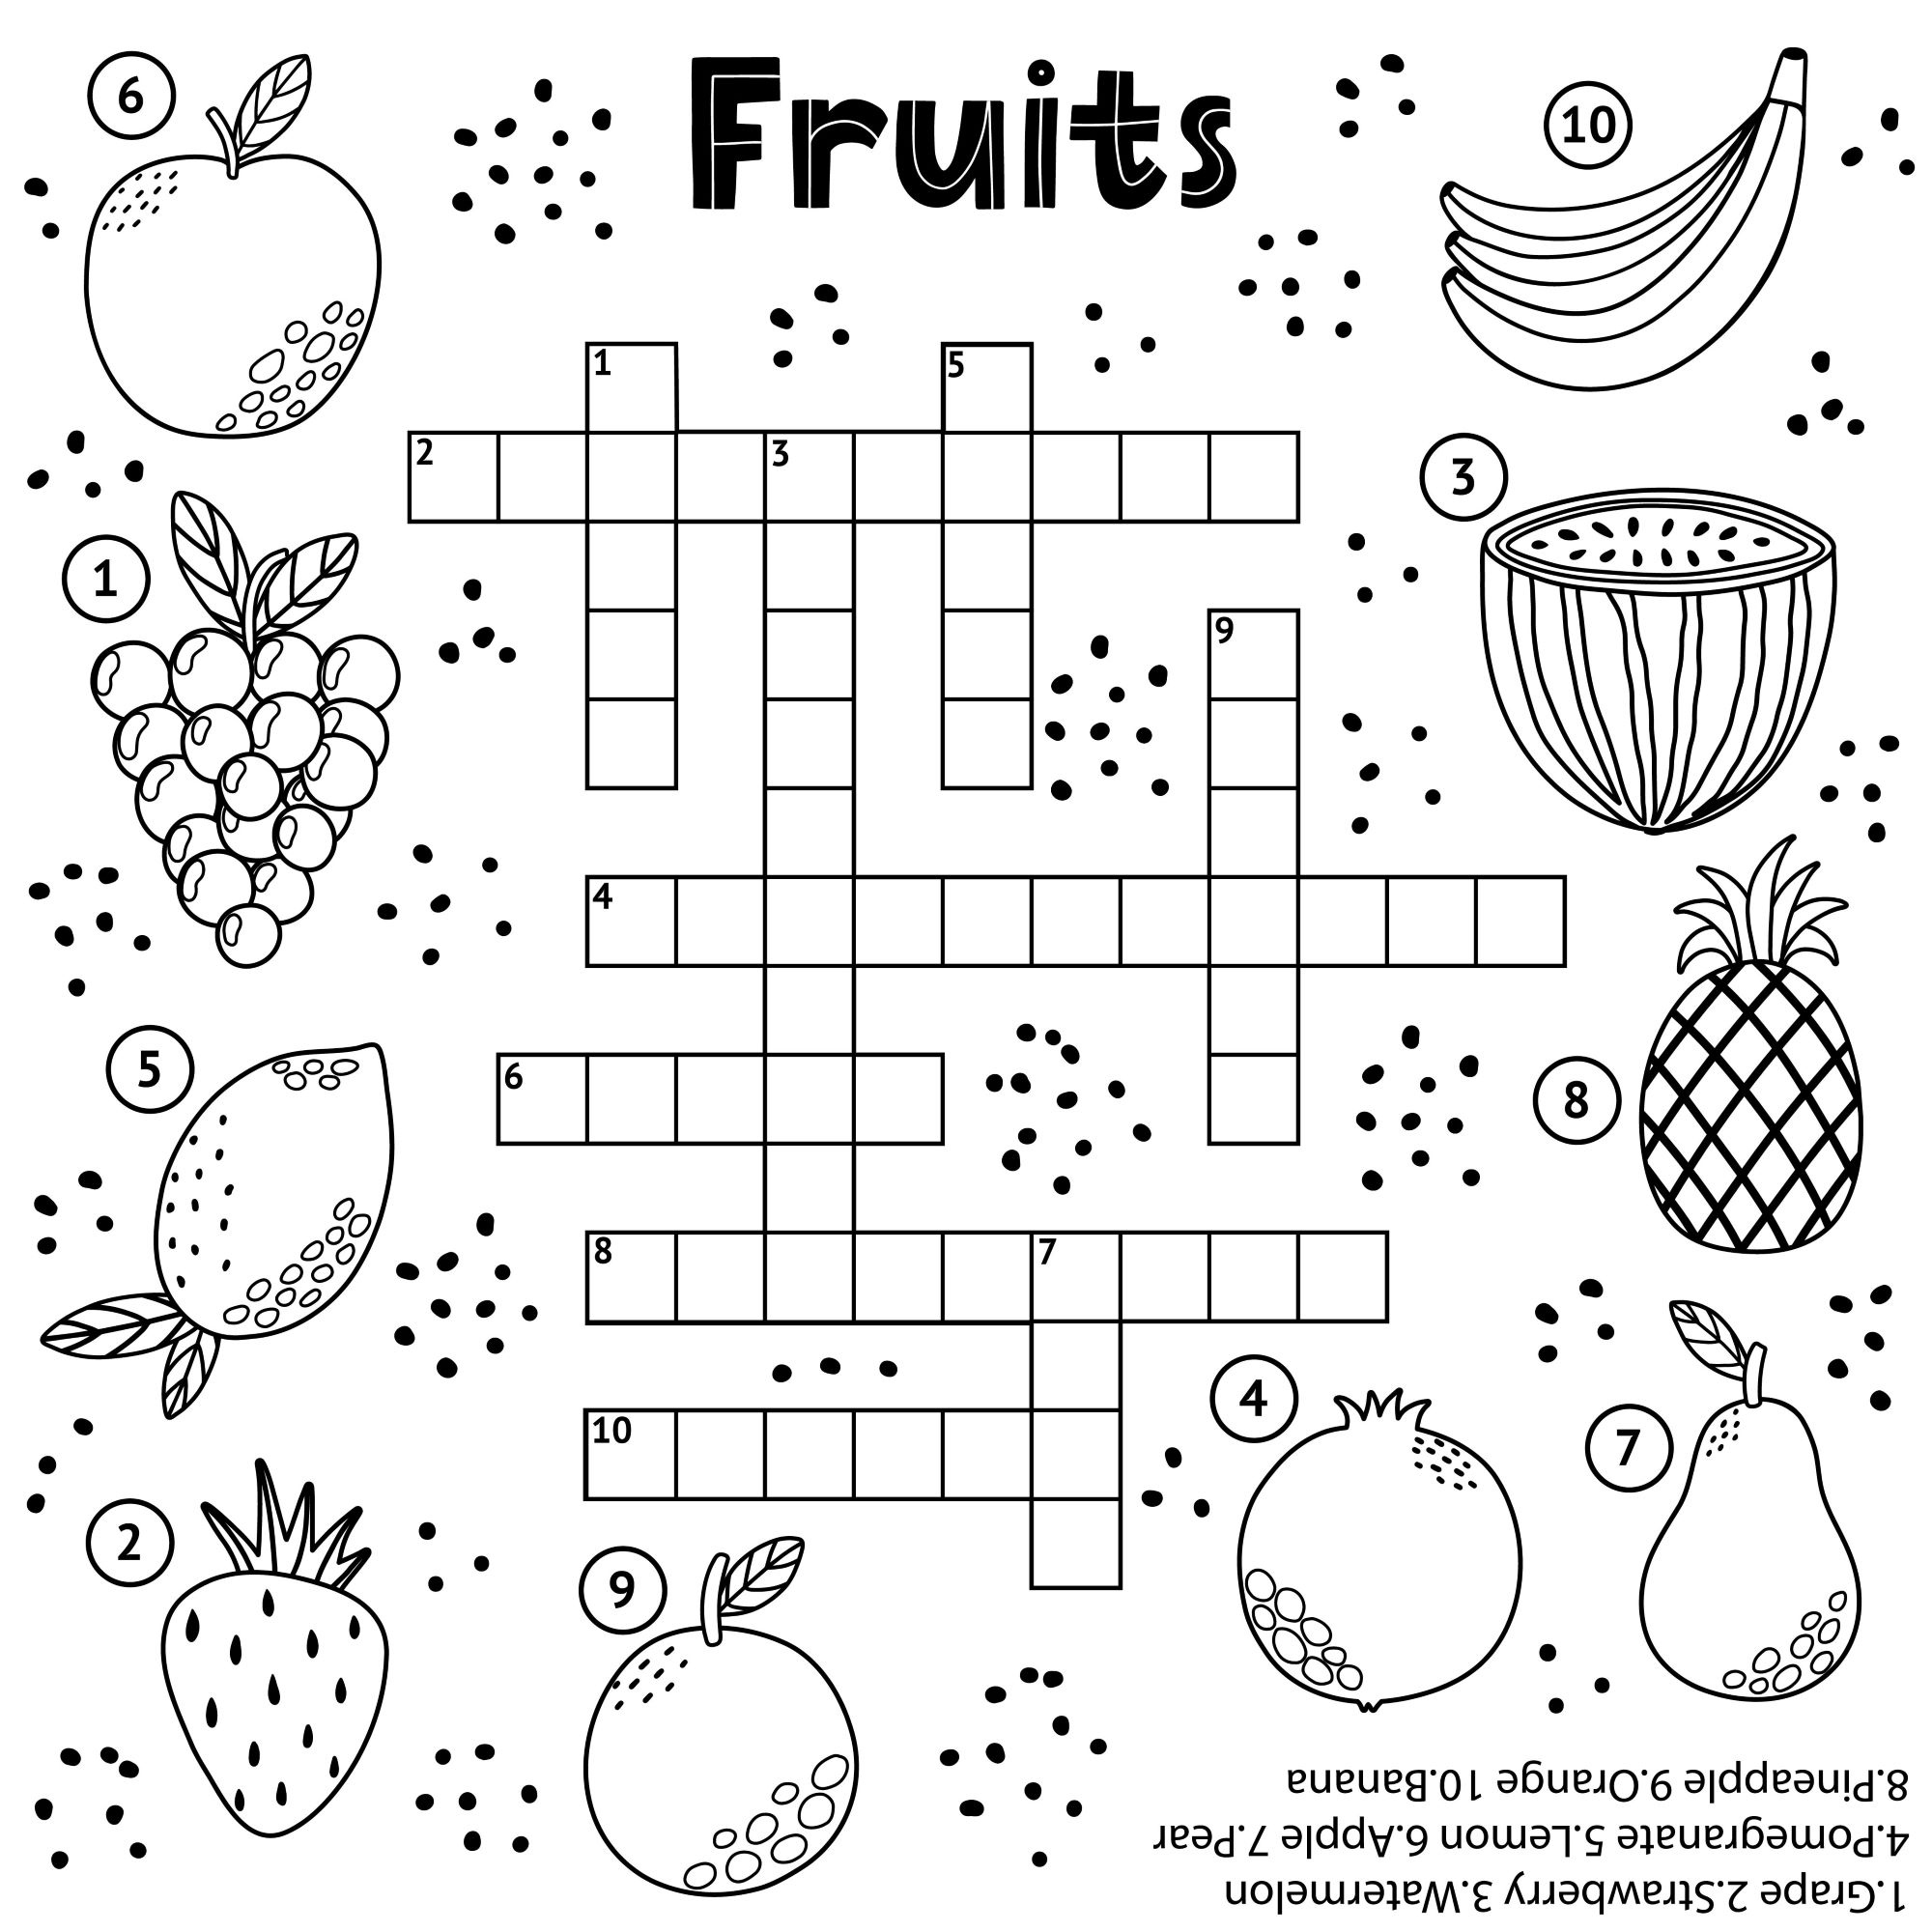 Fun Crossword Puzzles For Kids To Print Drama Club For Kids Printable